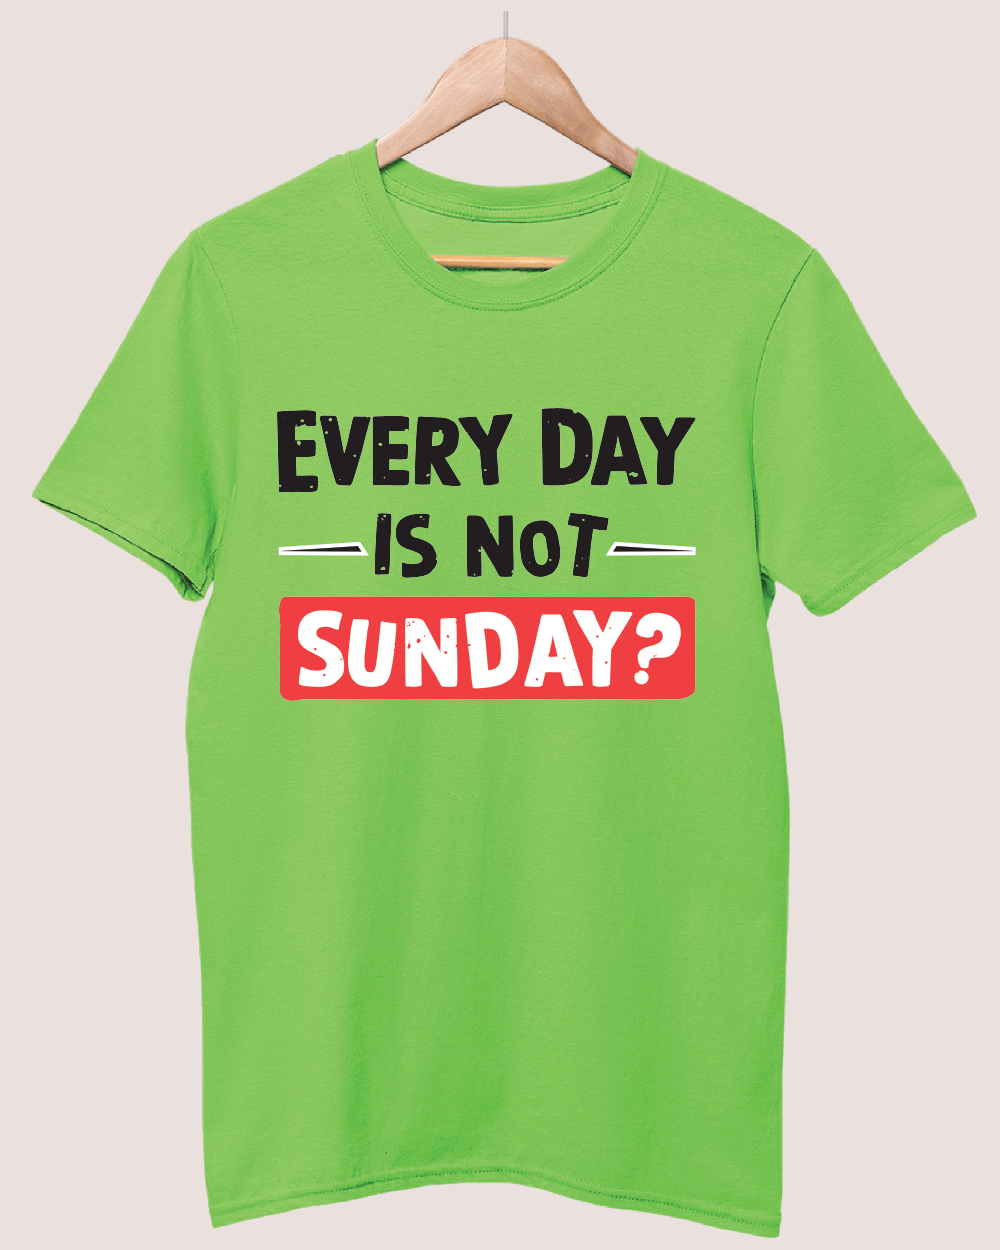 Everyday is not sunday T-shirt